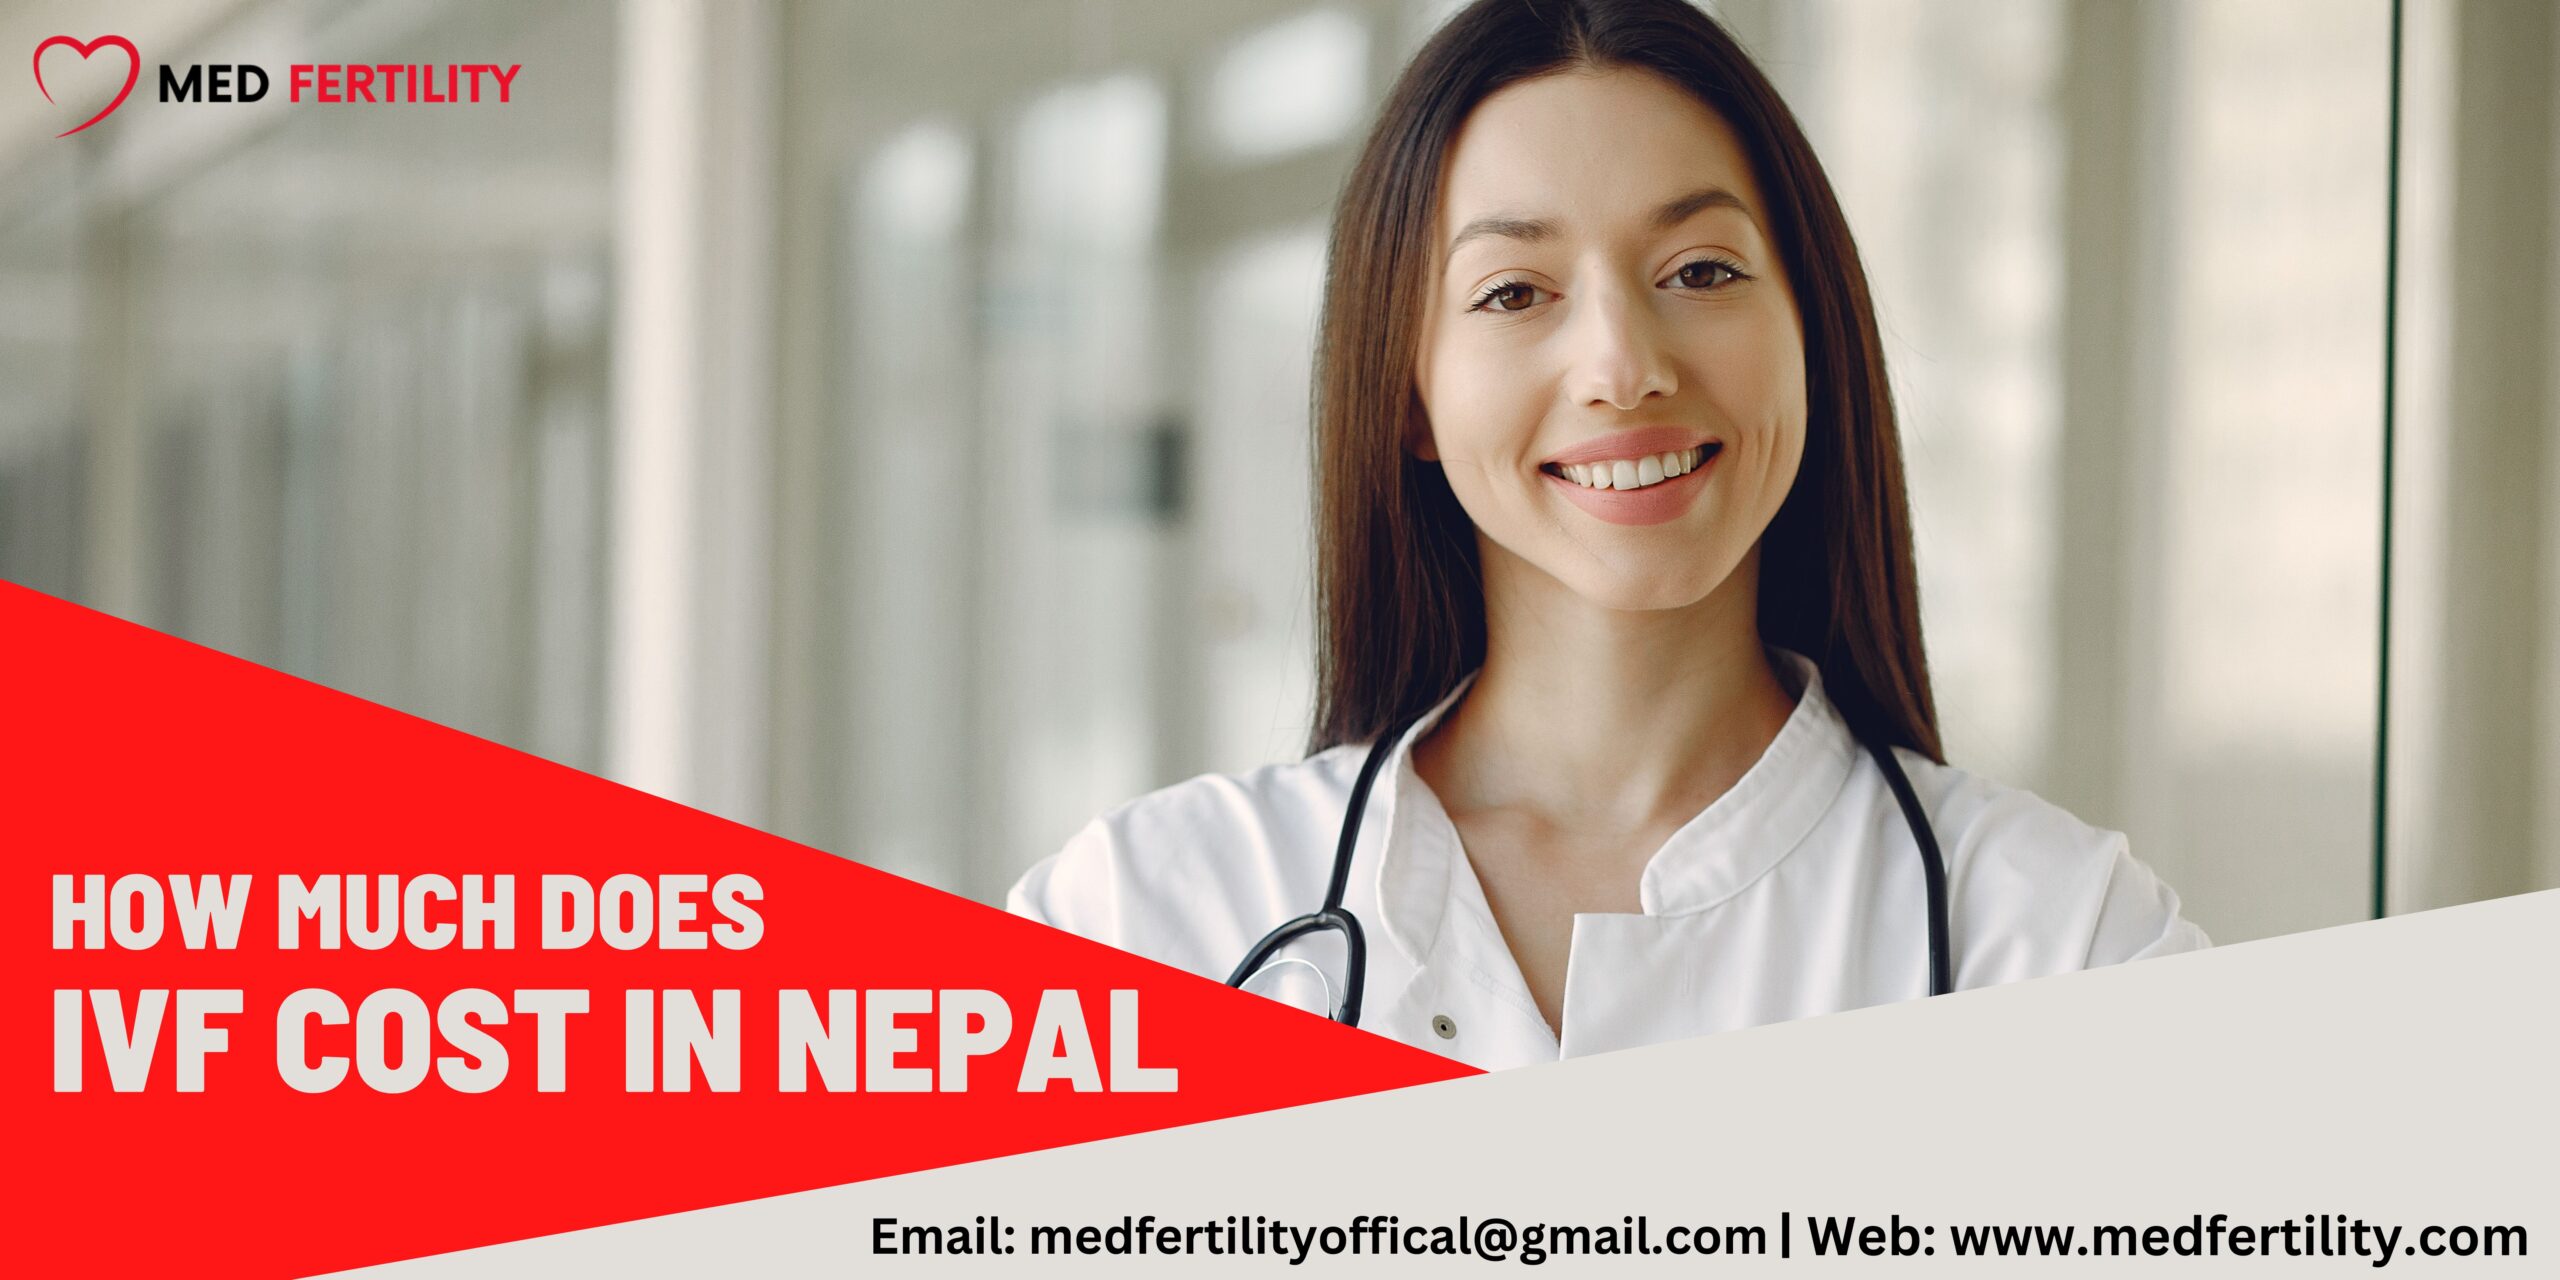 How much does IVF cost in Nepal